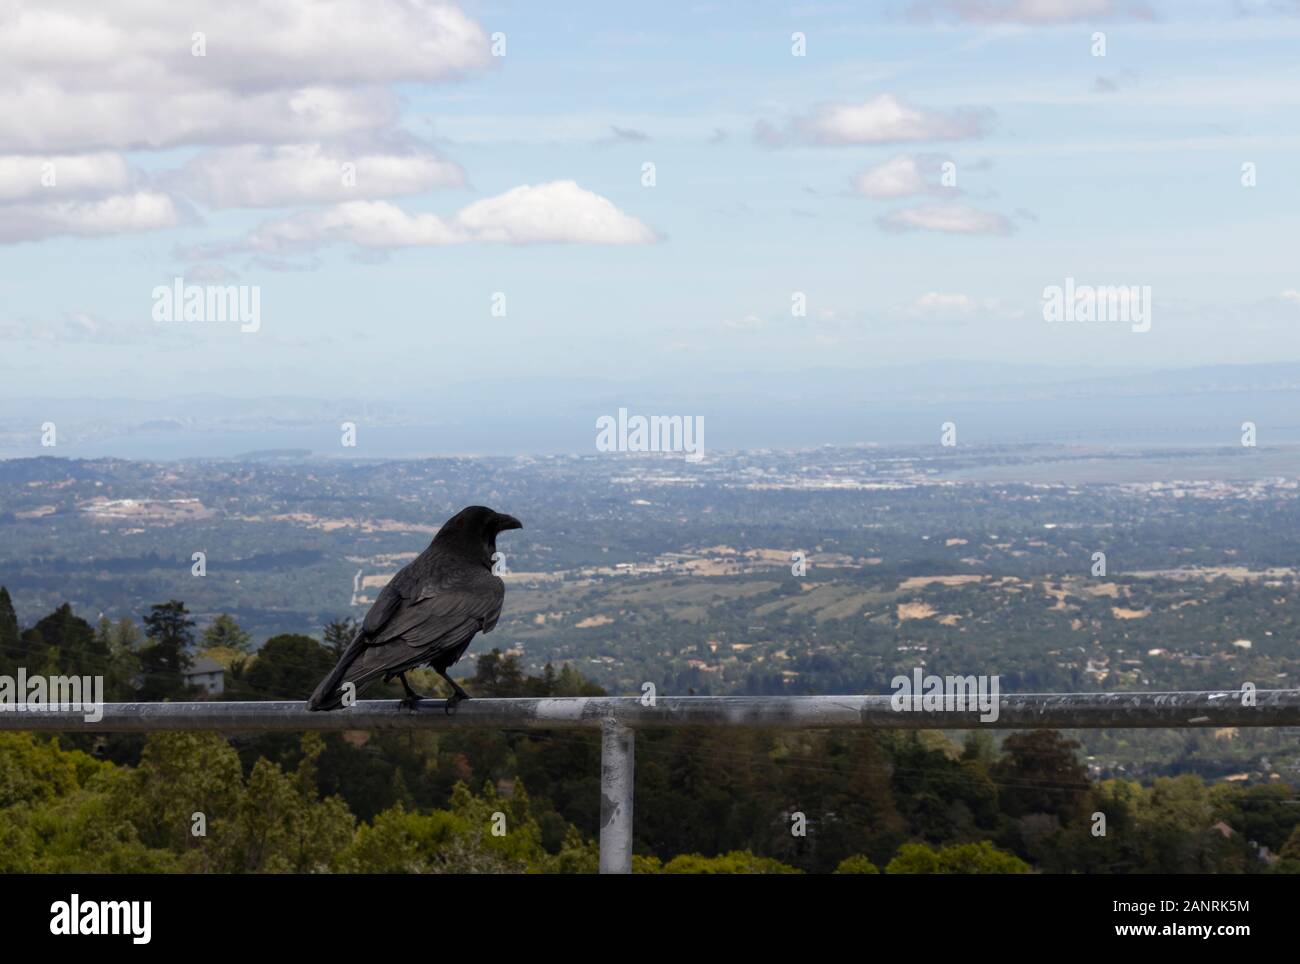 A crow taking in the view of San Francisco and the Bay Area. Stock Photo